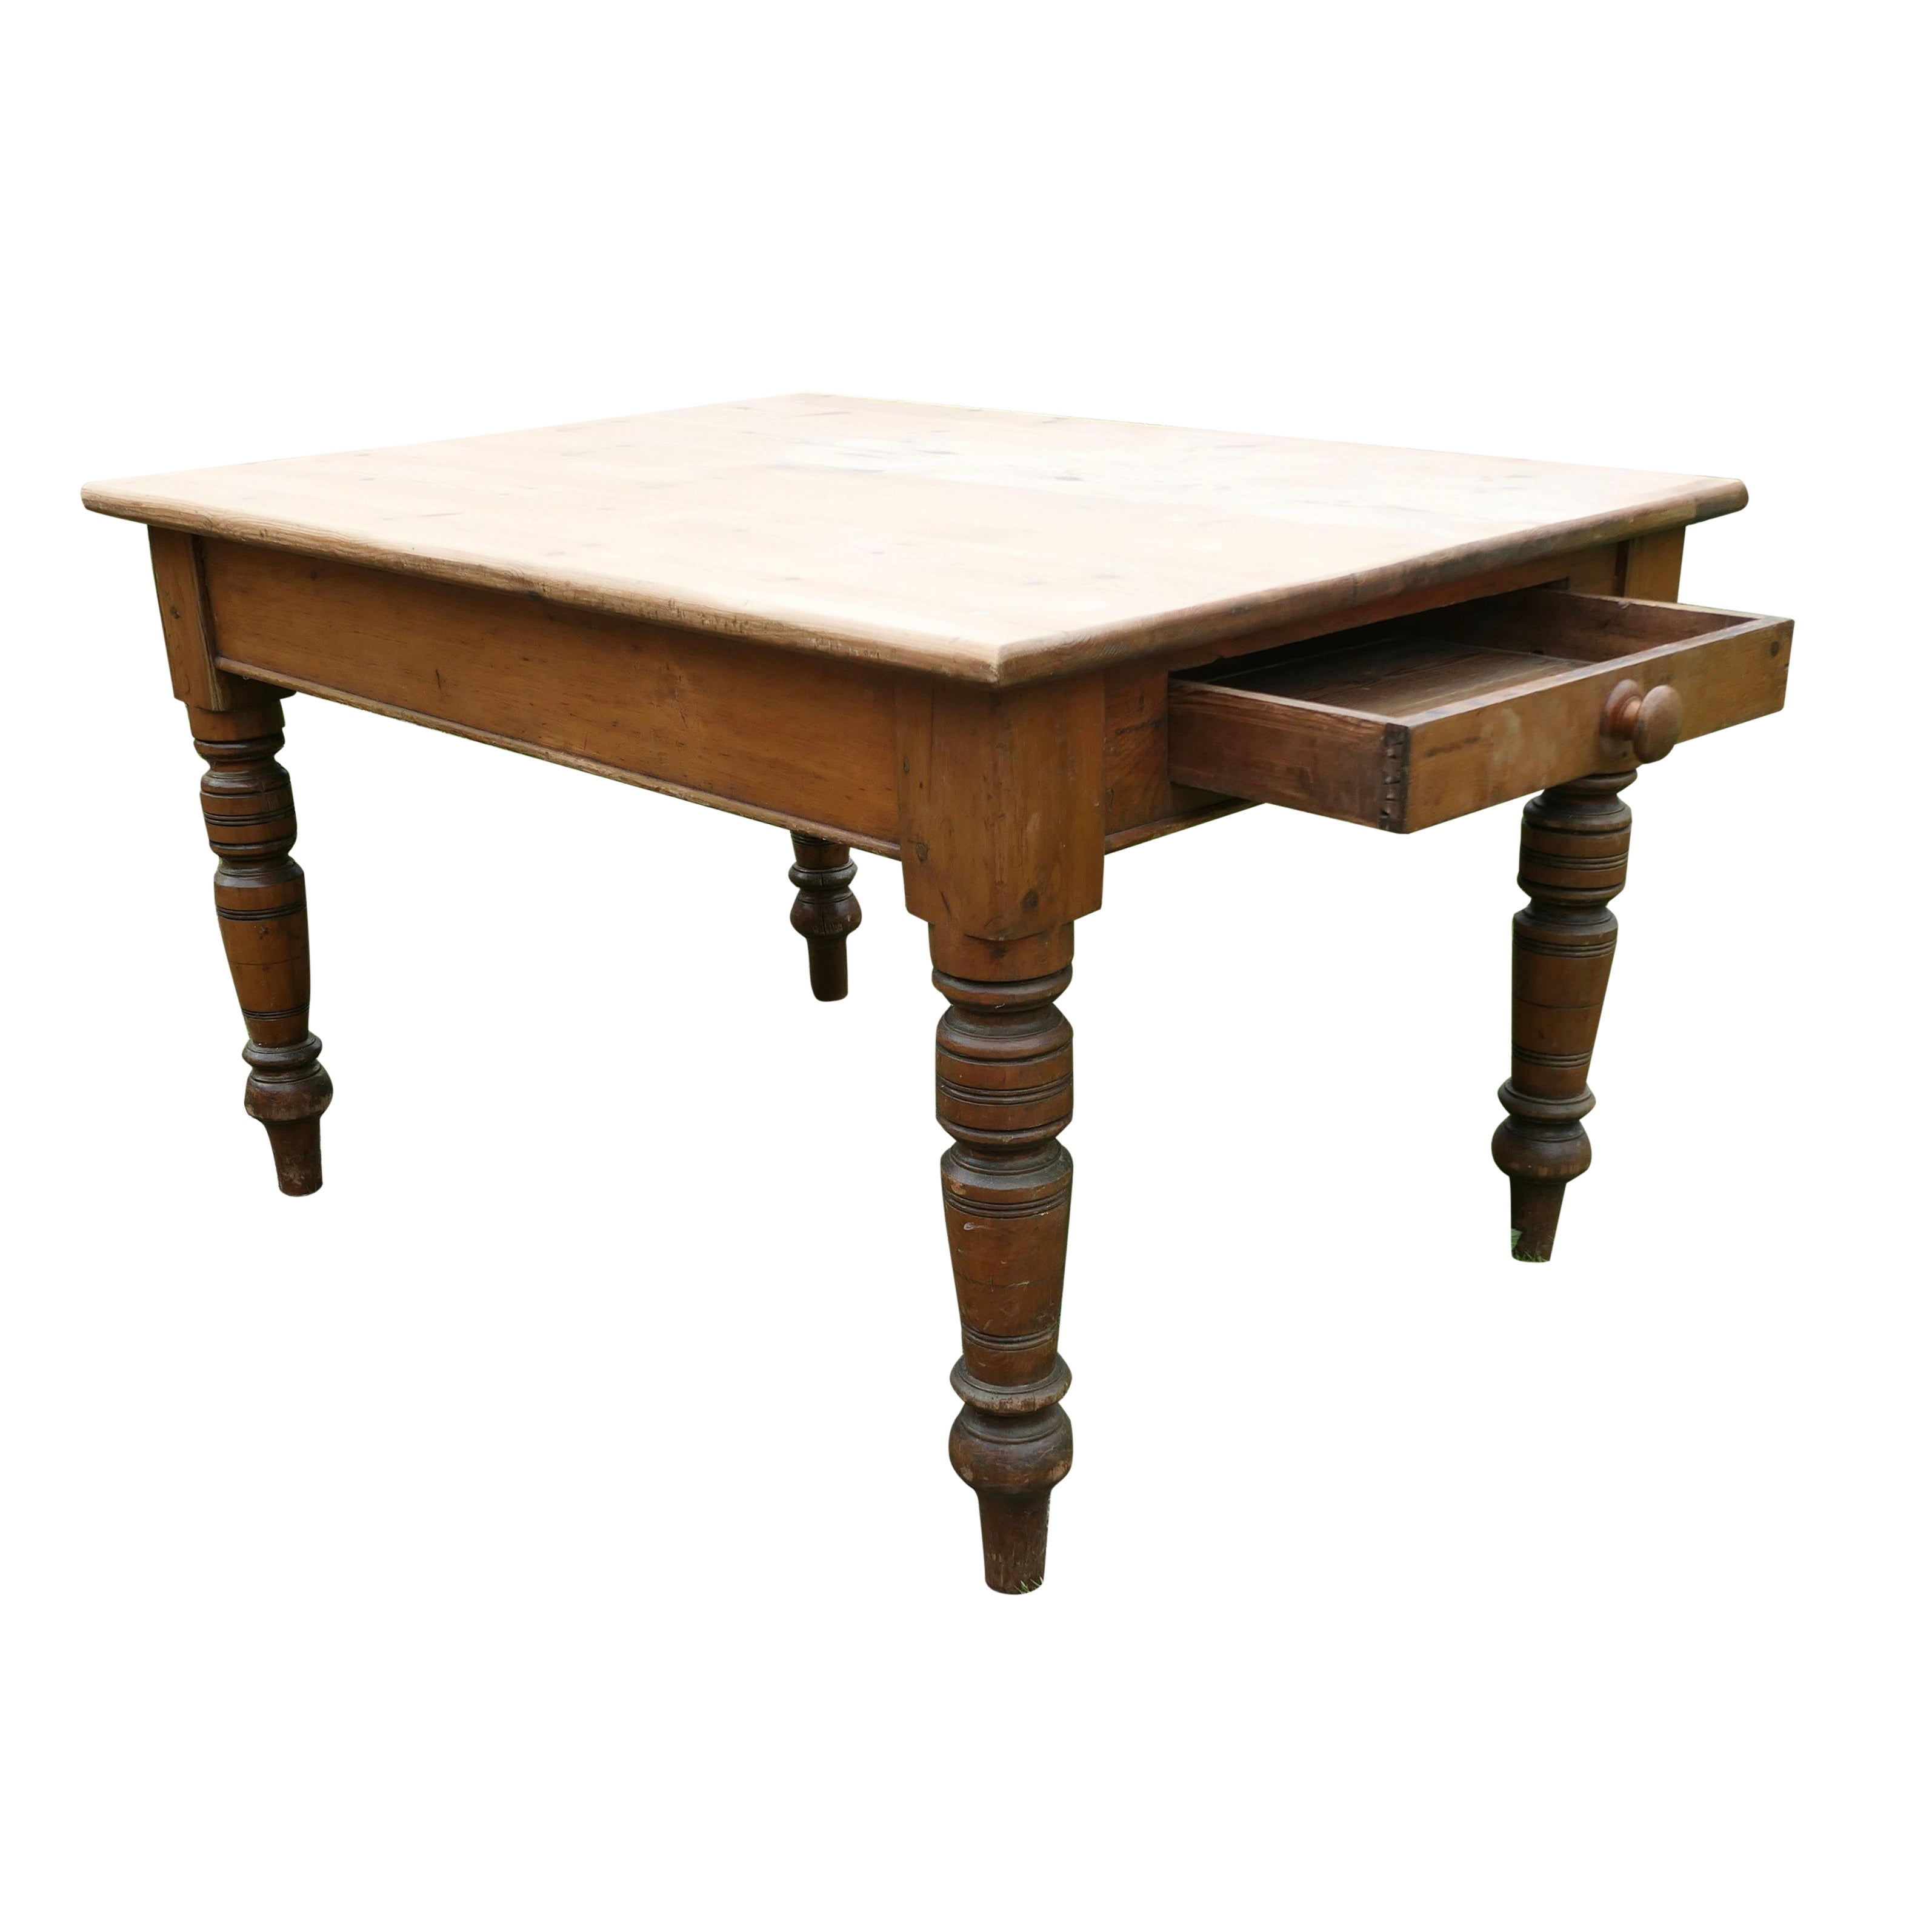 6 Seater Farmhouse Pine Table    This is a good Rustic Farmhouse table  For Sale